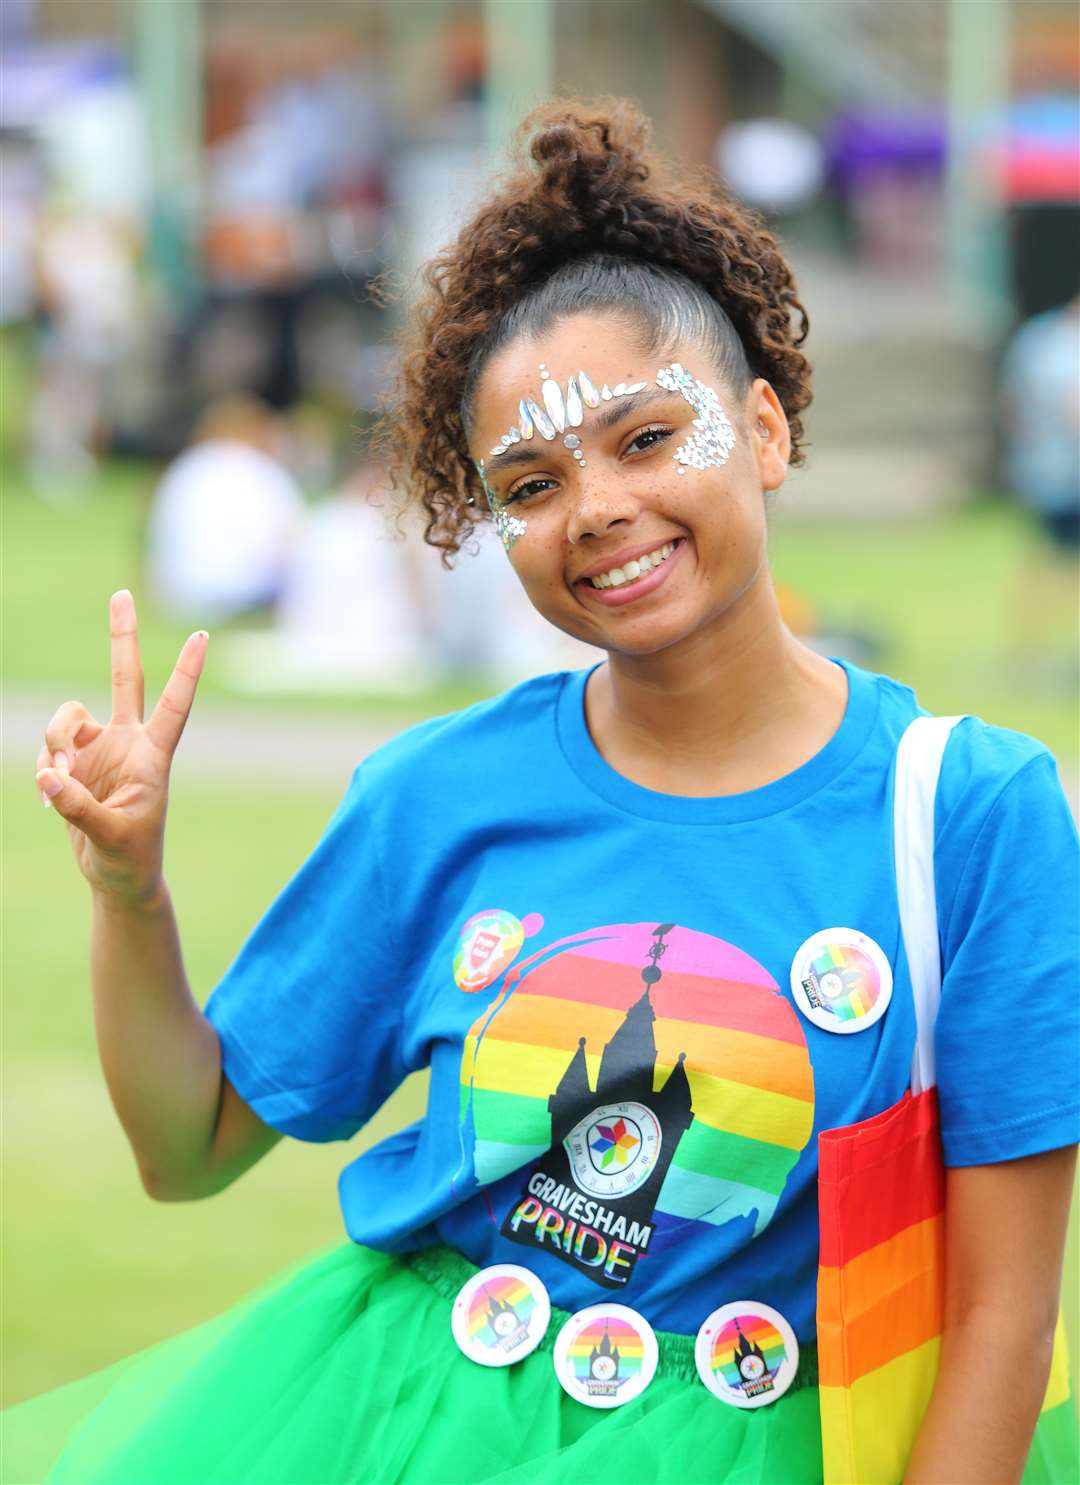 A party-goer at Gravesham Pride held at the Fort Gardens. Photo: Cohesion Plus